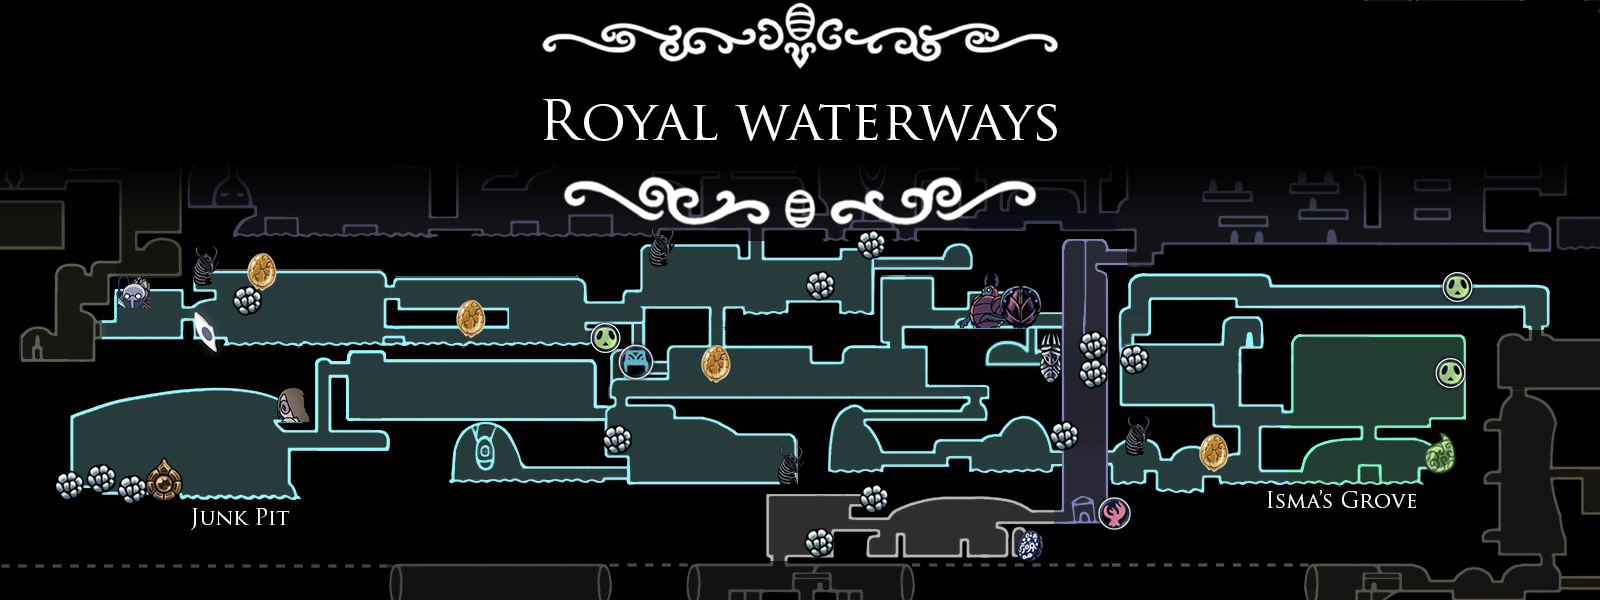 royal waterways map hollow knight wiki guide